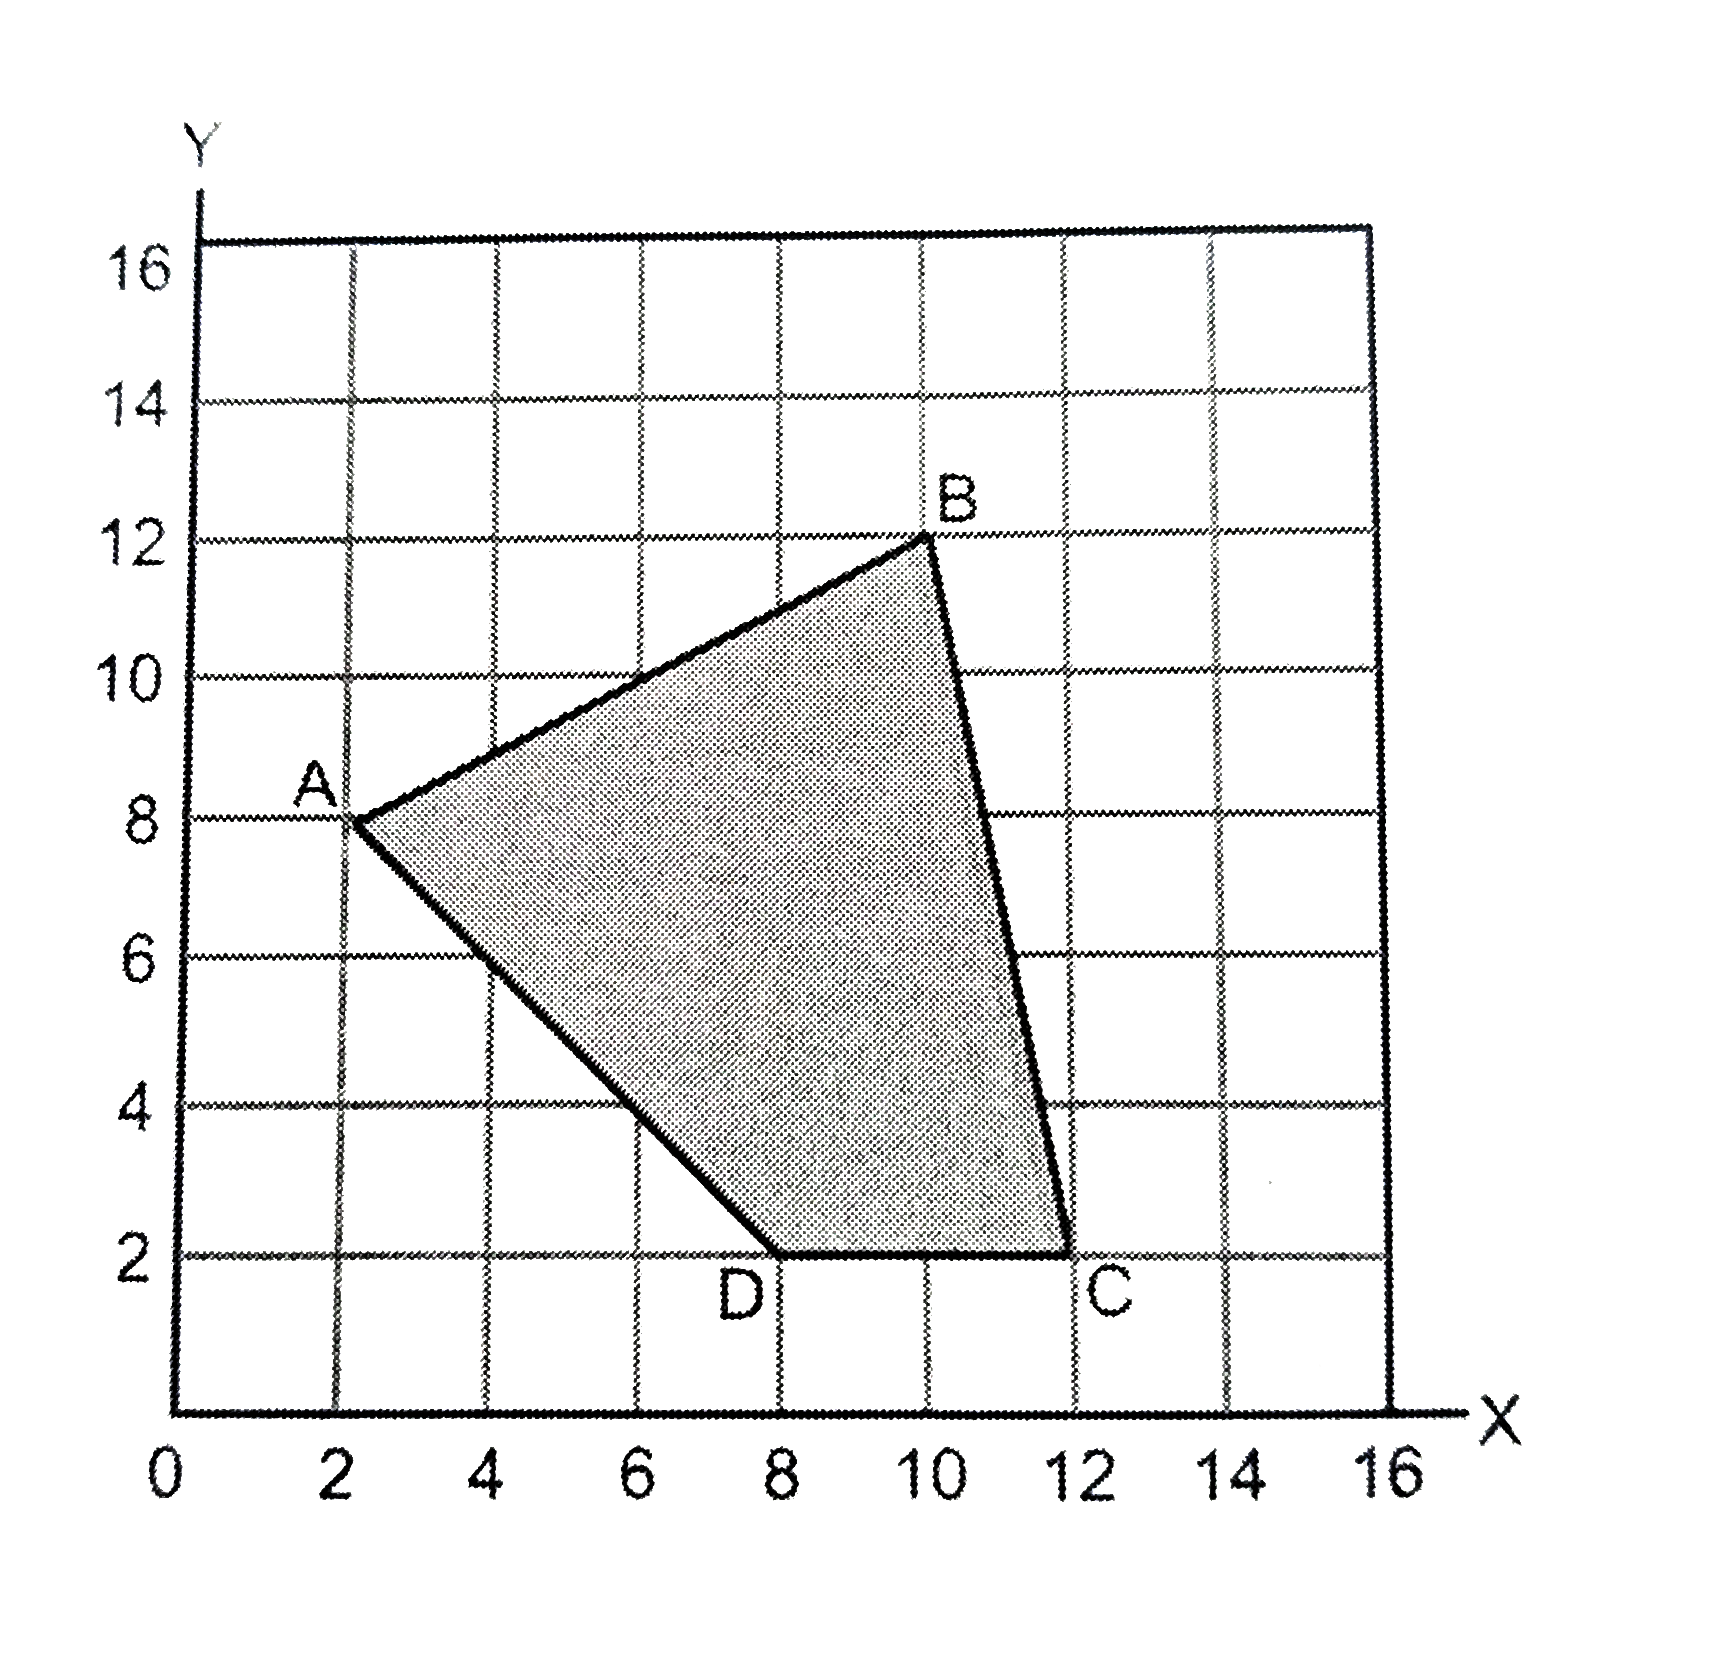 What is the area of the quadrilateral ABCD as shown in the figure above?